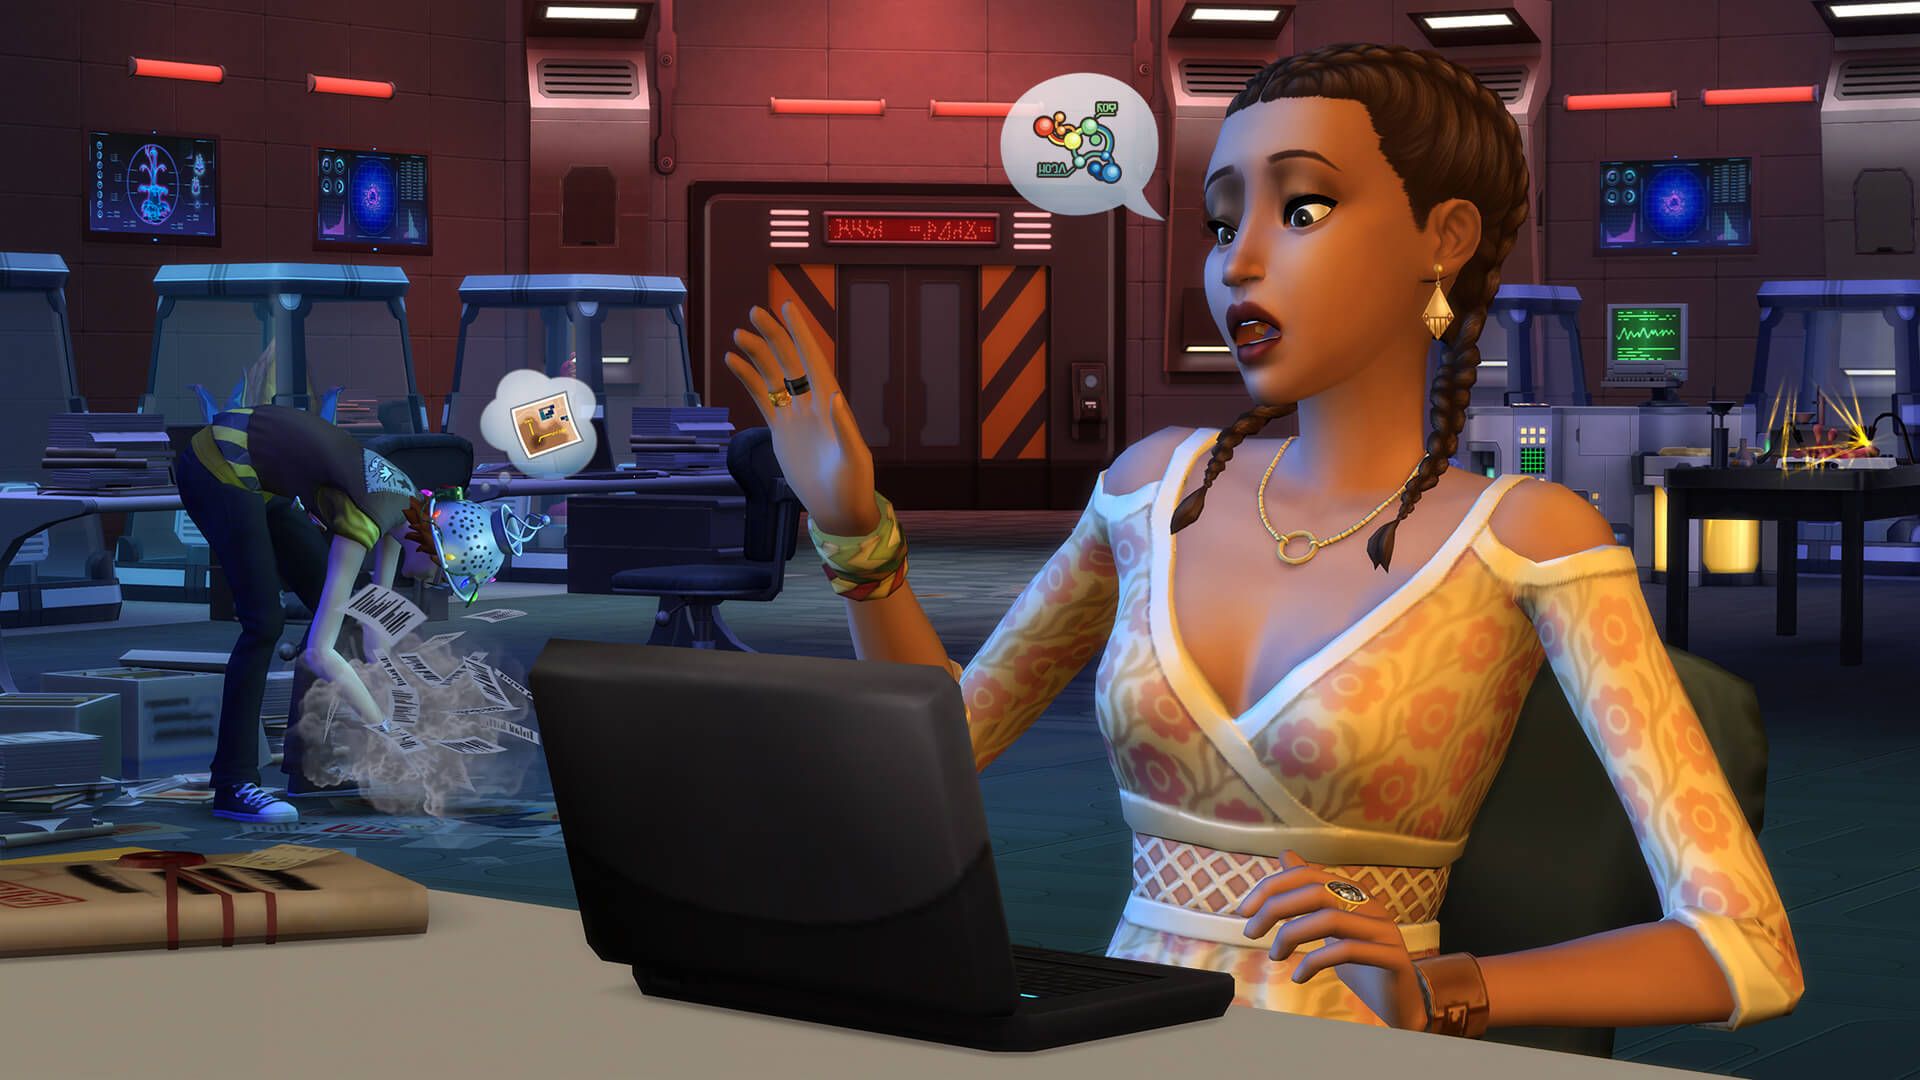 the sims 4 dlcs download